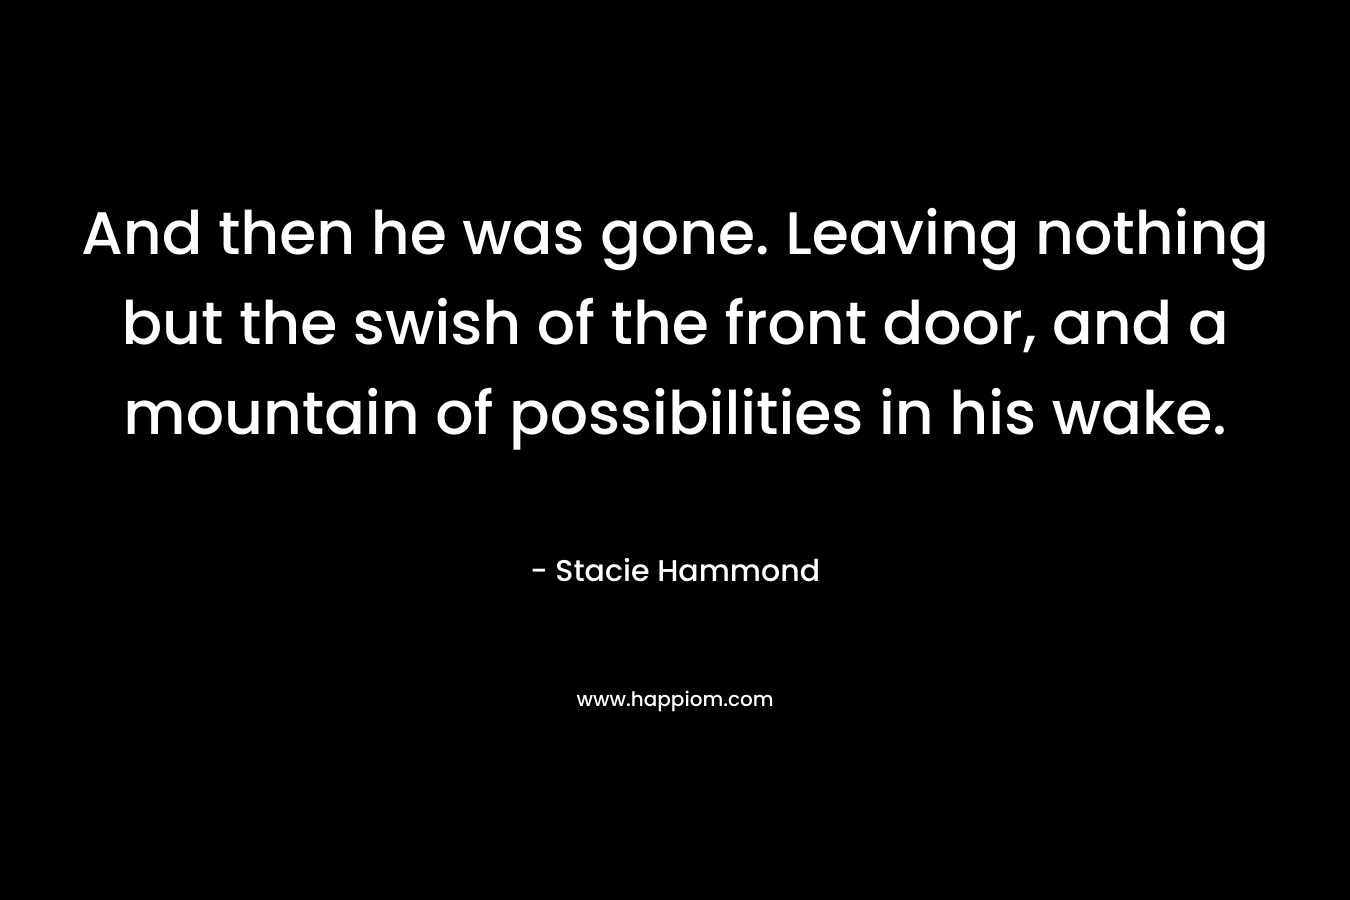 And then he was gone. Leaving nothing but the swish of the front door, and a mountain of possibilities in his wake. – Stacie Hammond